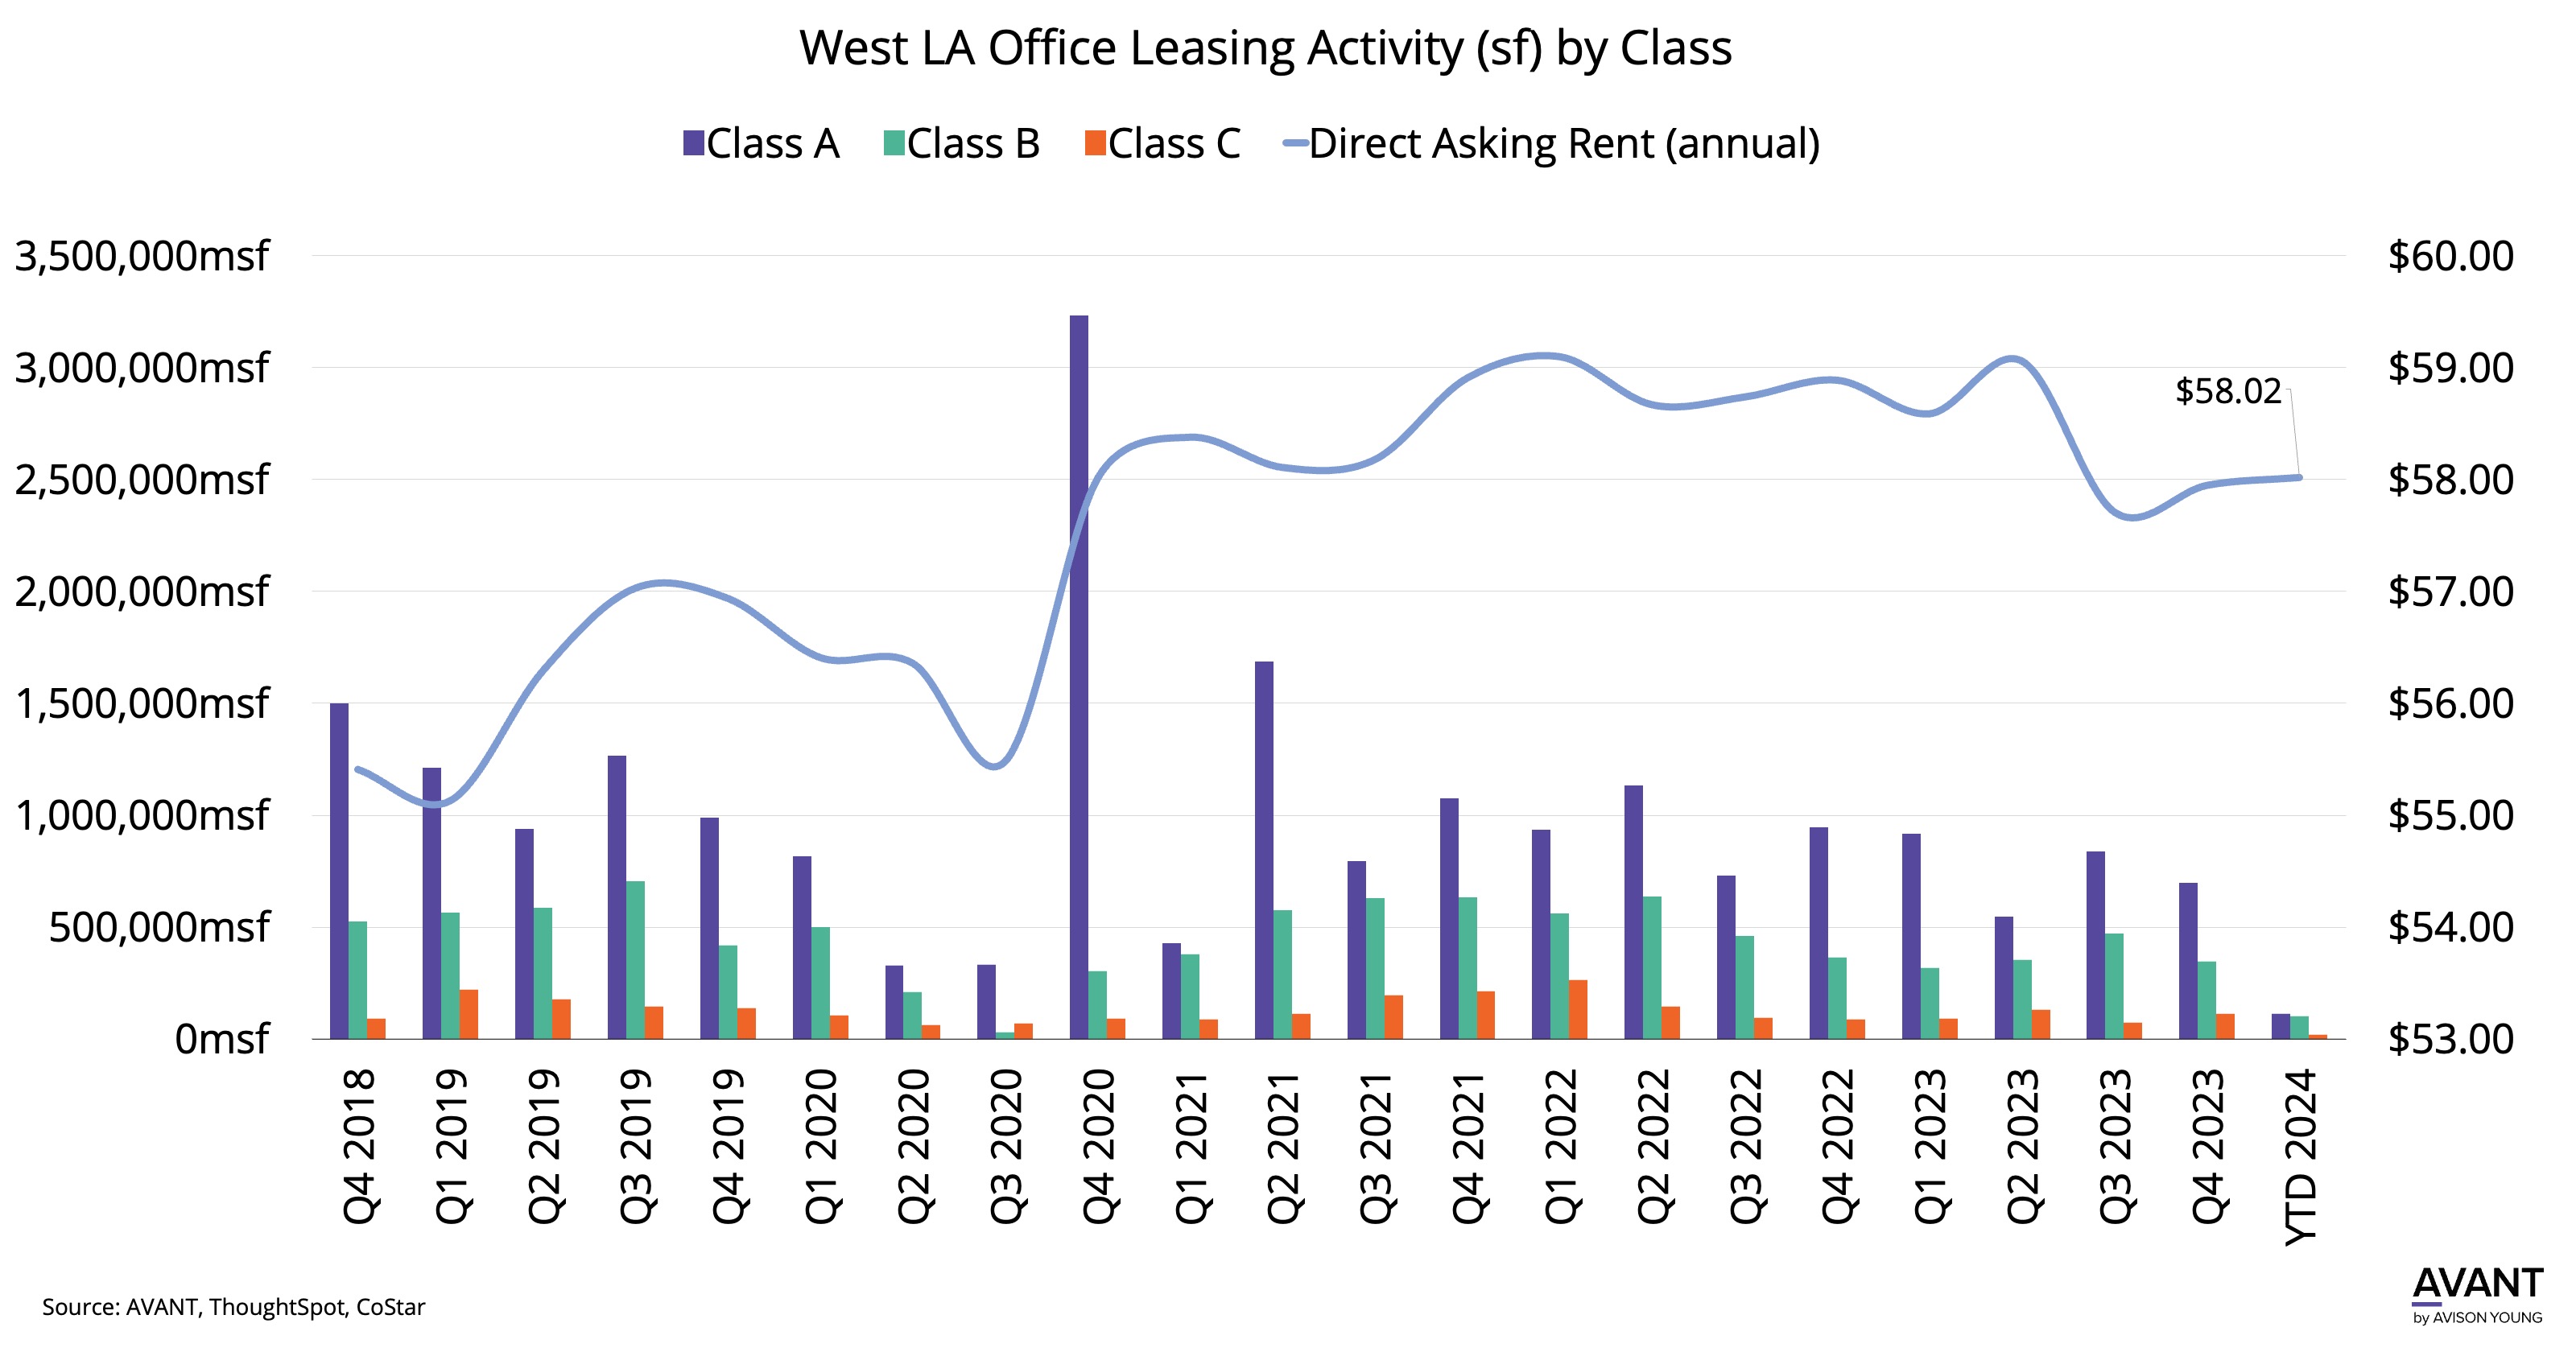 A chart depicting West LA Office Leasing Activity (sf) by Class Q4 2018 - Q4 2023